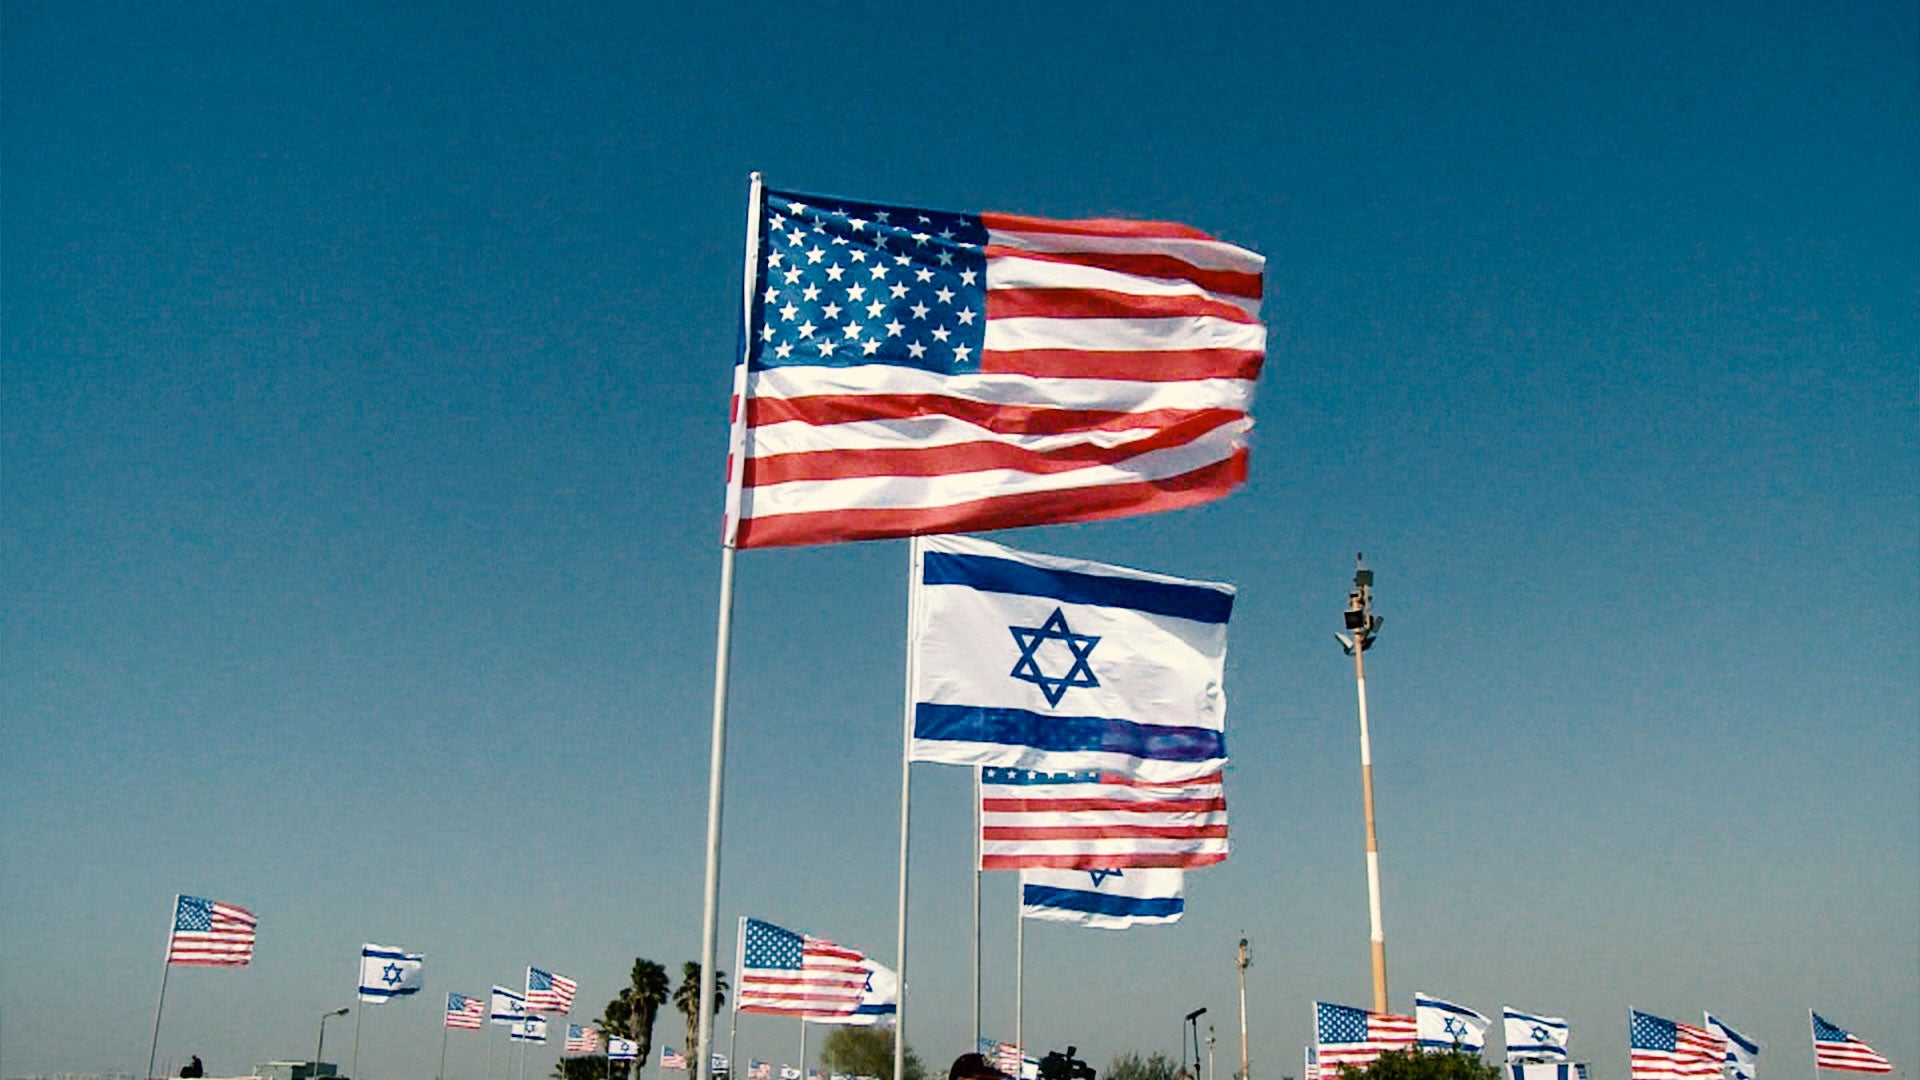 Anti-Israel, Anti-Jewish Tone Pushed by Isolationist Wing on Right